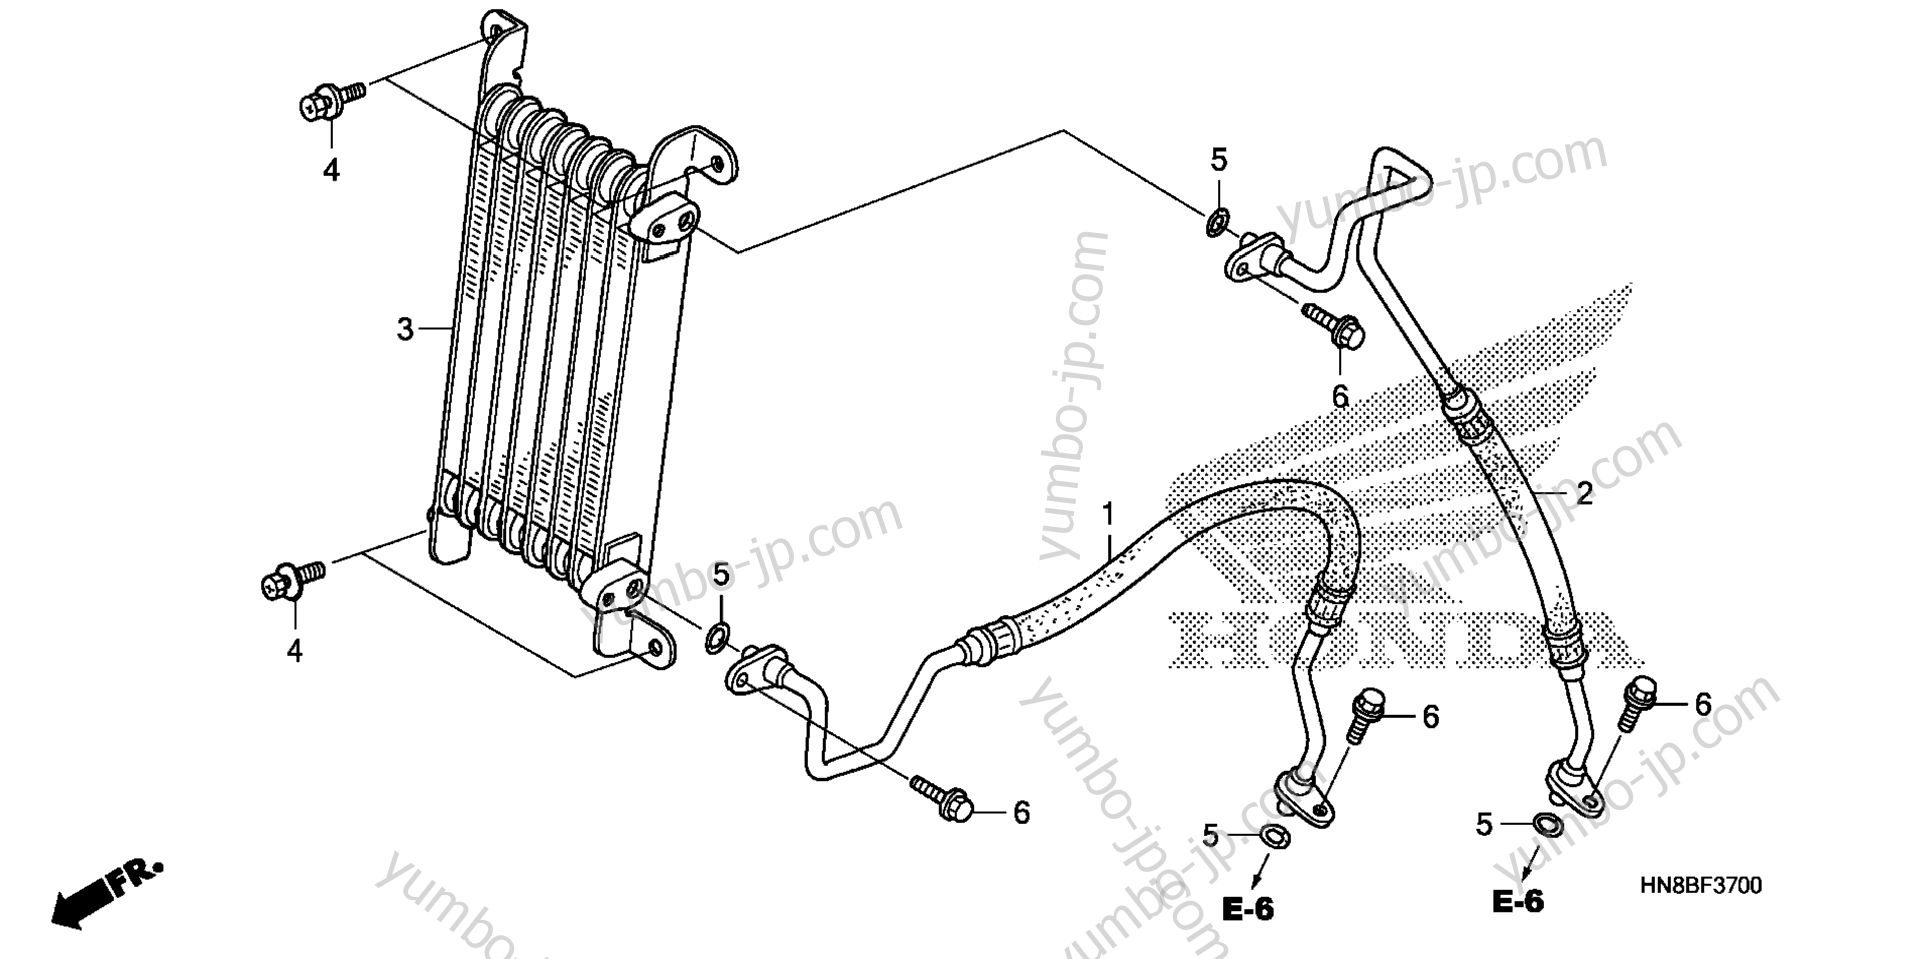 OIL COOLER for ATVs HONDA TRX680FA 2A 2012 year